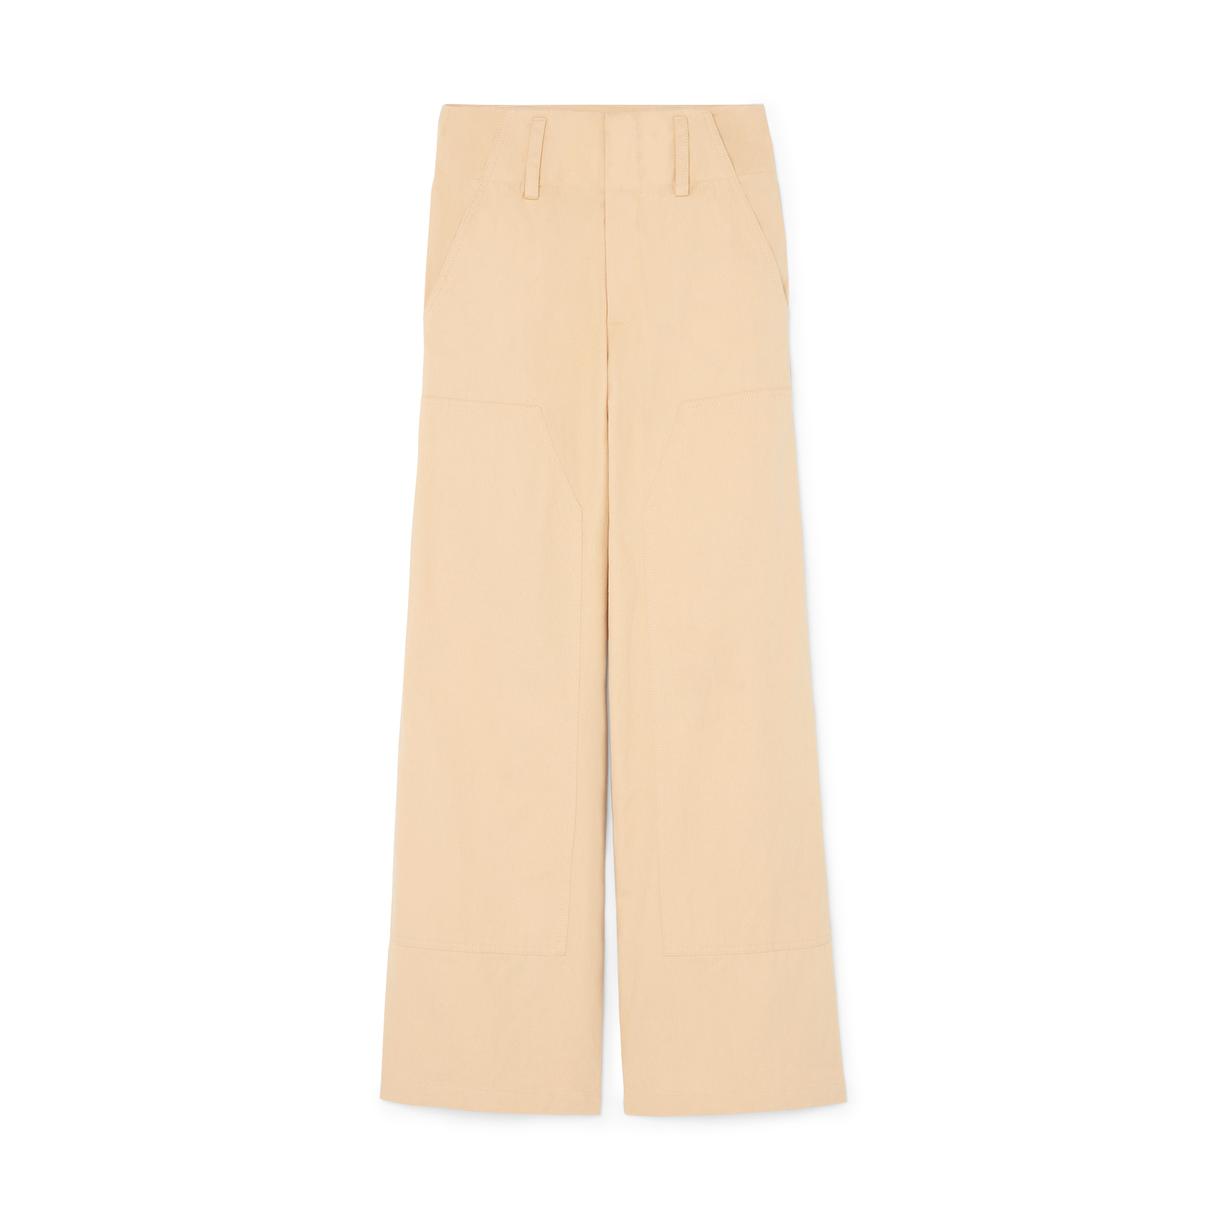 Sea Sia Solid Patched Pants